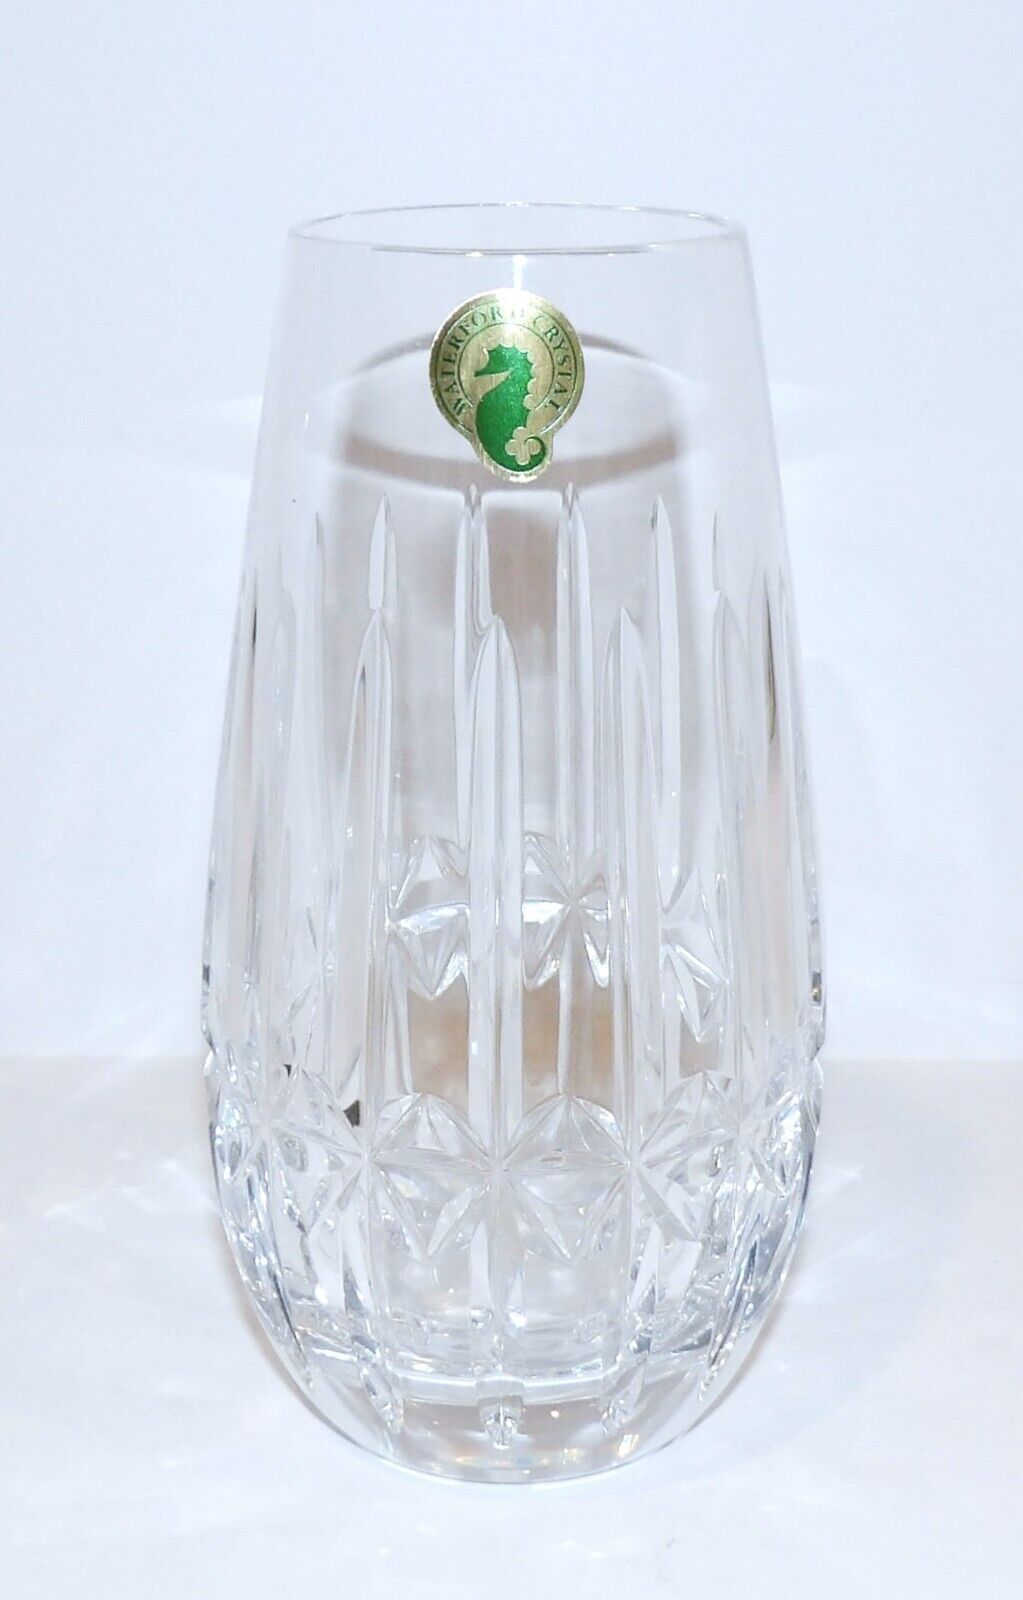 EXQUISITE WATERFORD CRYSTAL BEAUTIFULLY SHAPED & CUT 6 1/4